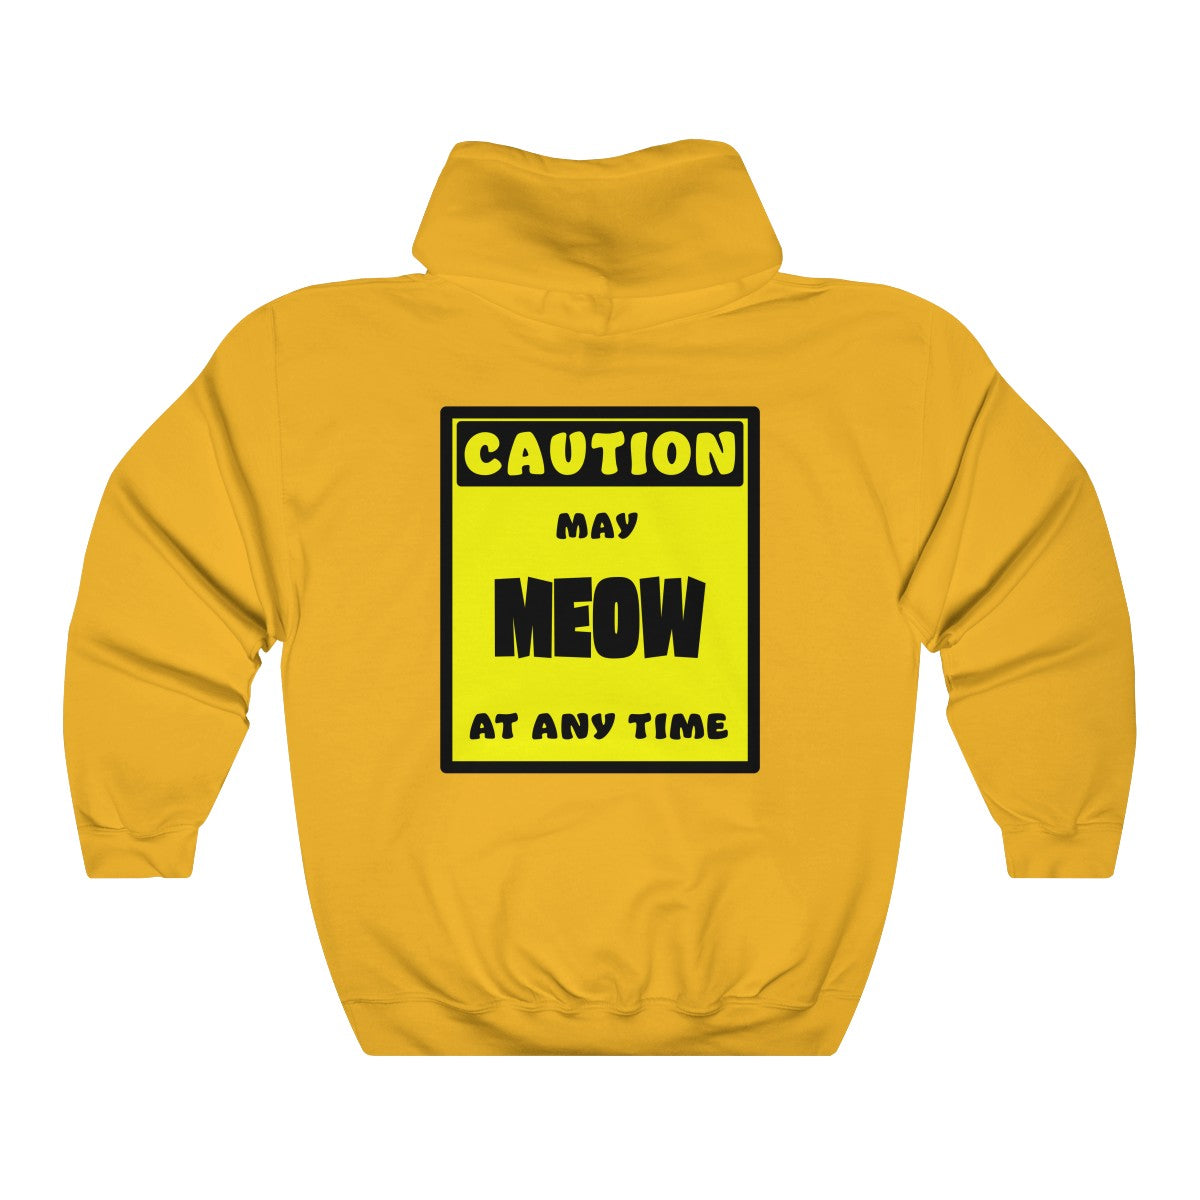 CAUTION! May MEOW at any time! - Hoodie Hoodie AFLT-Whootorca Gold S 